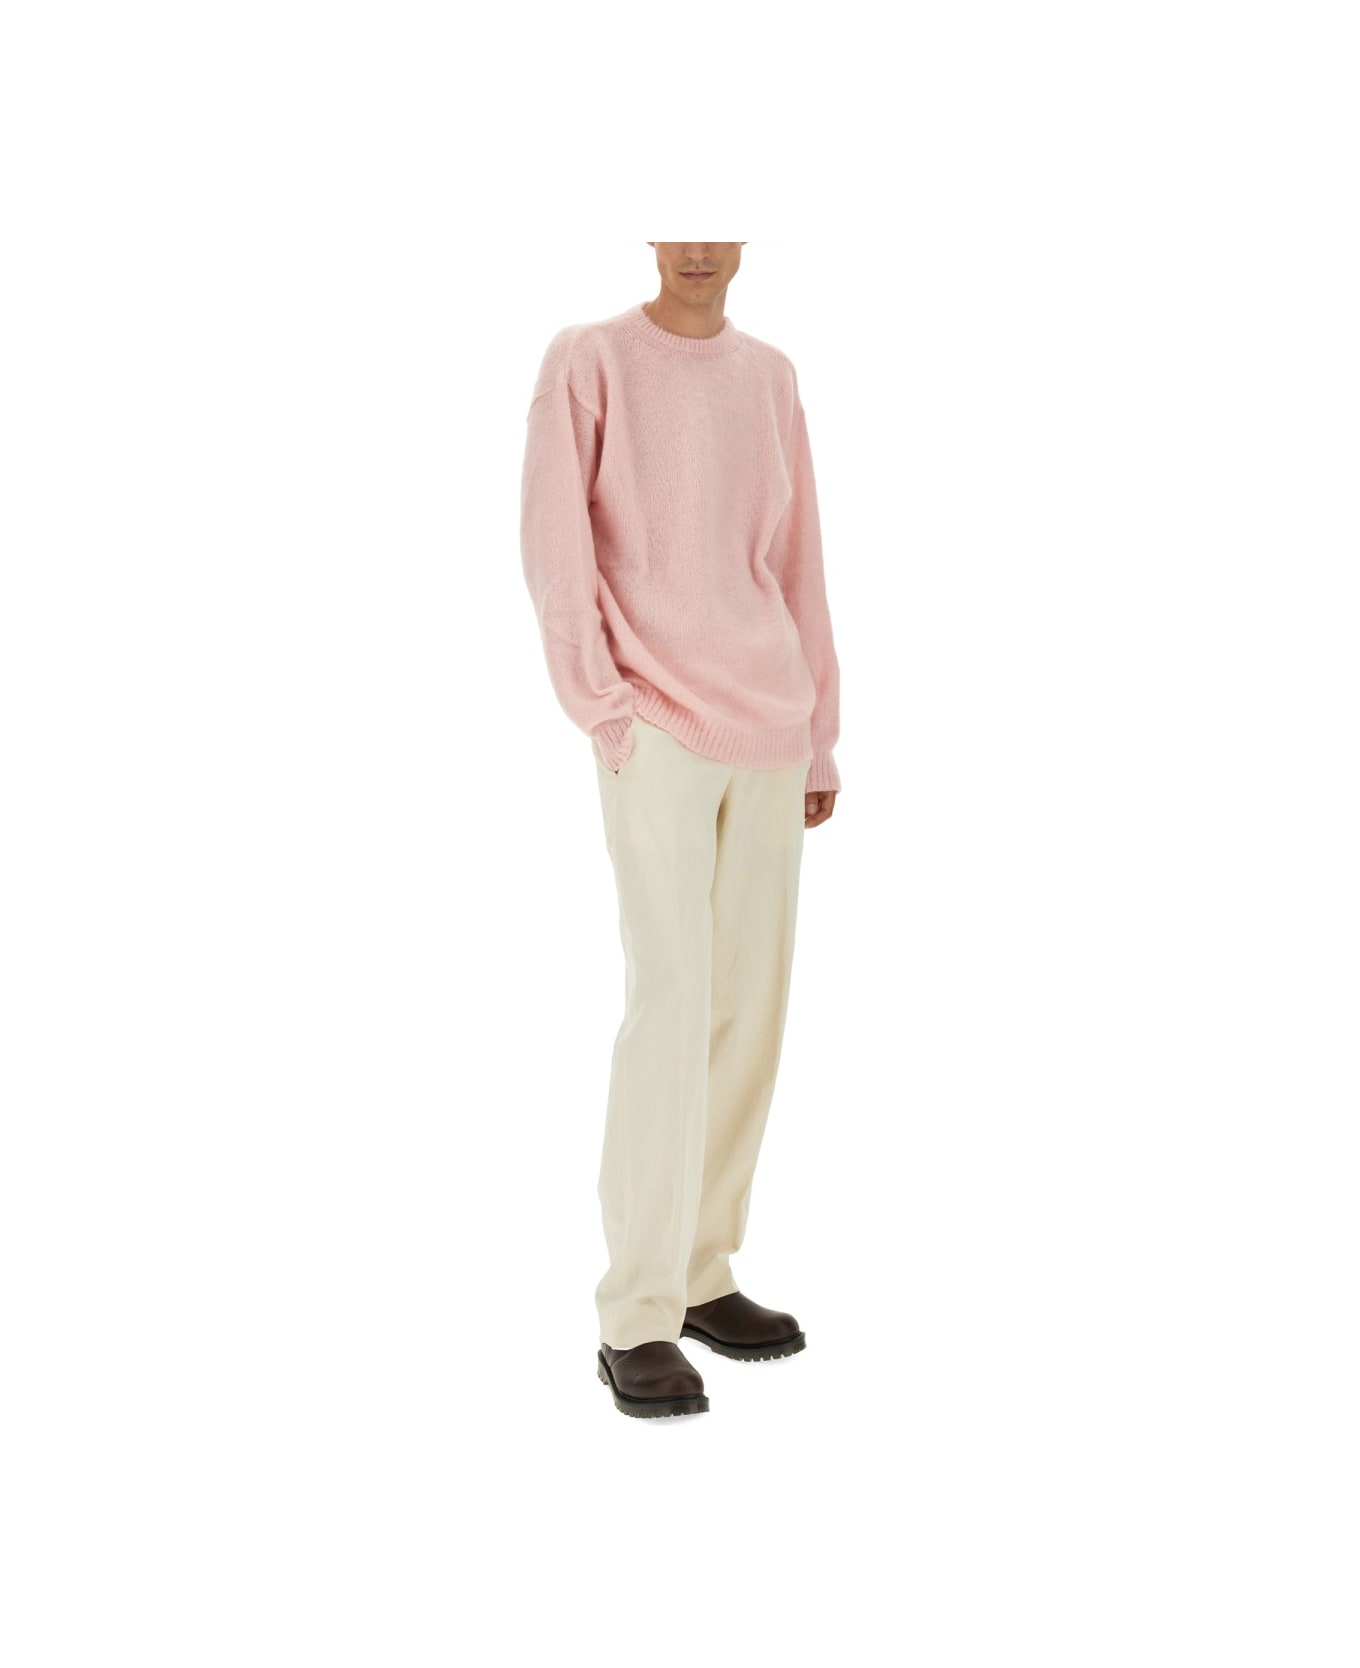 Family First Milano Mohair Sweater - PINK